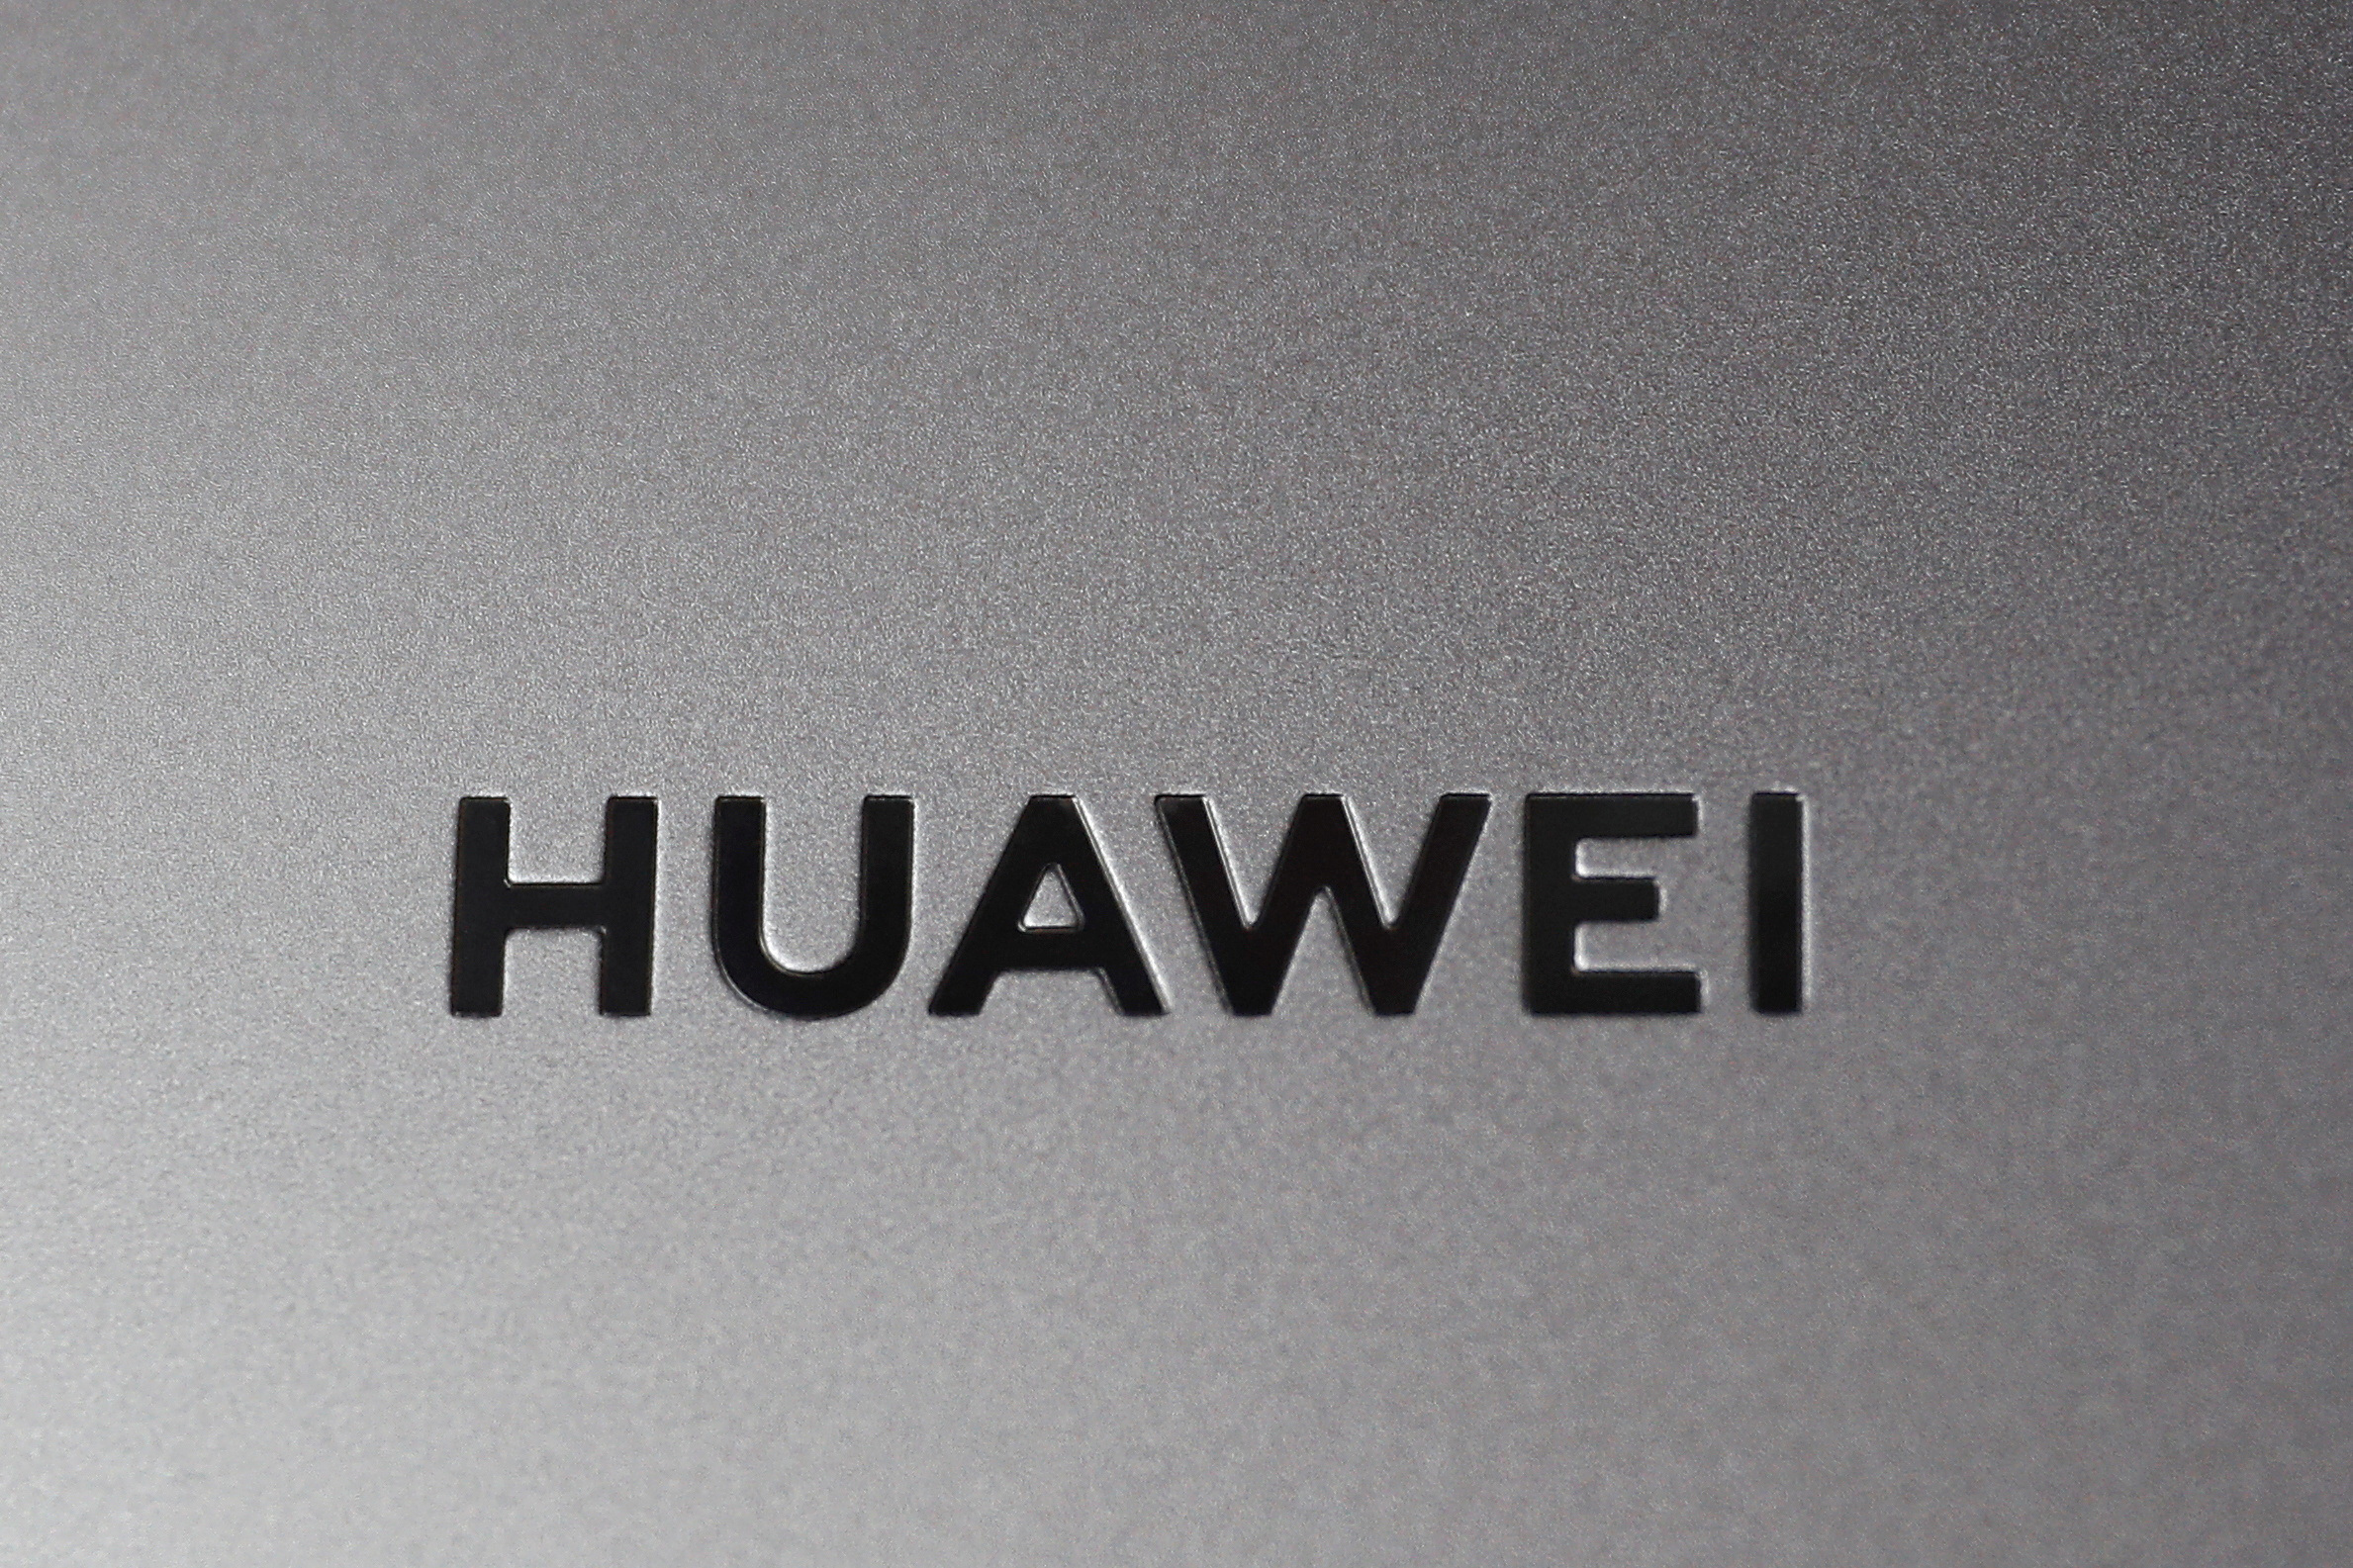 A Huawei logo is seen on a device at a media event in London